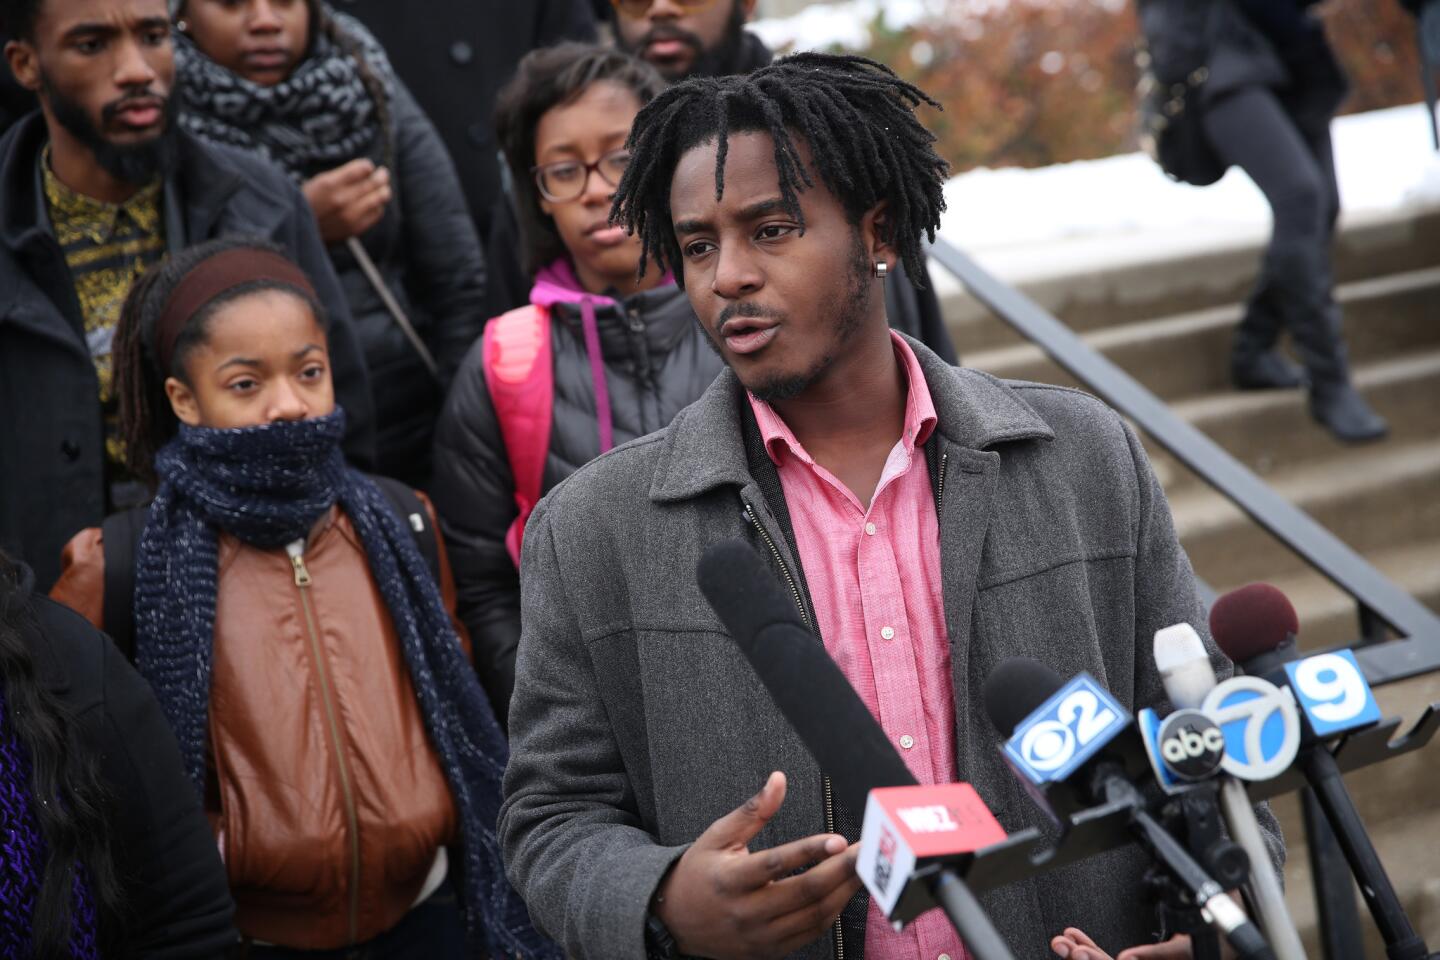 Malcolm London speaks during a news conference with African-American activists at the 2nd District Chicago Police Department headquarters on Nov. 23, 2015. The group gathered to talk about the impending release of a video showing the fatal police shooting of Laquan McDonald, 17.